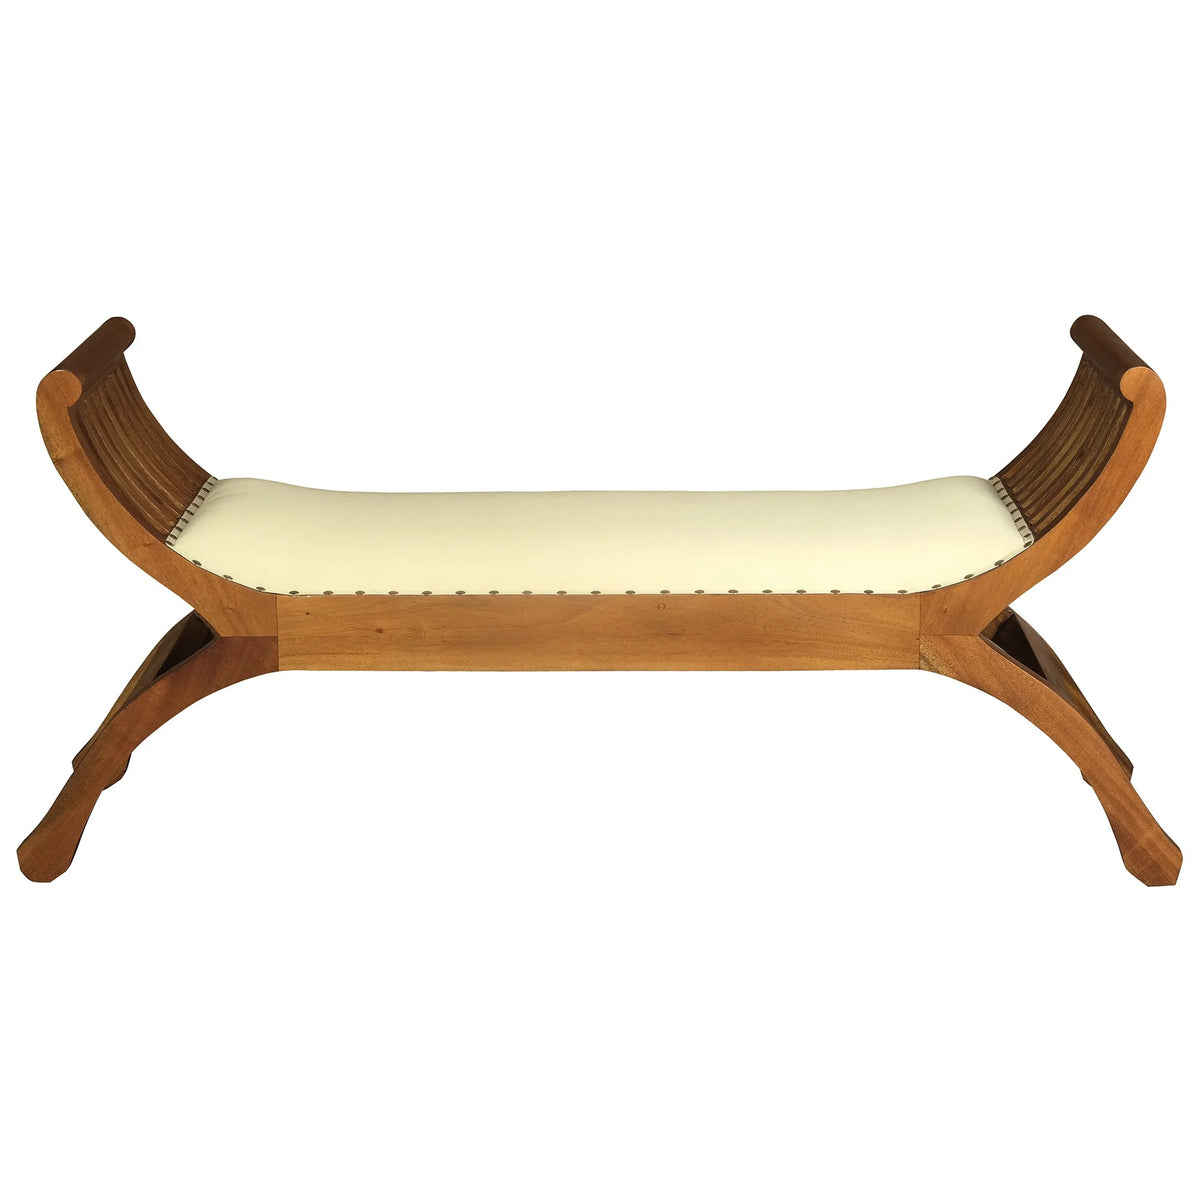 Upholstered Mahogany Timber Curved Bench with Cushioned Seat in Light Pecan- 130cm - Notbrand